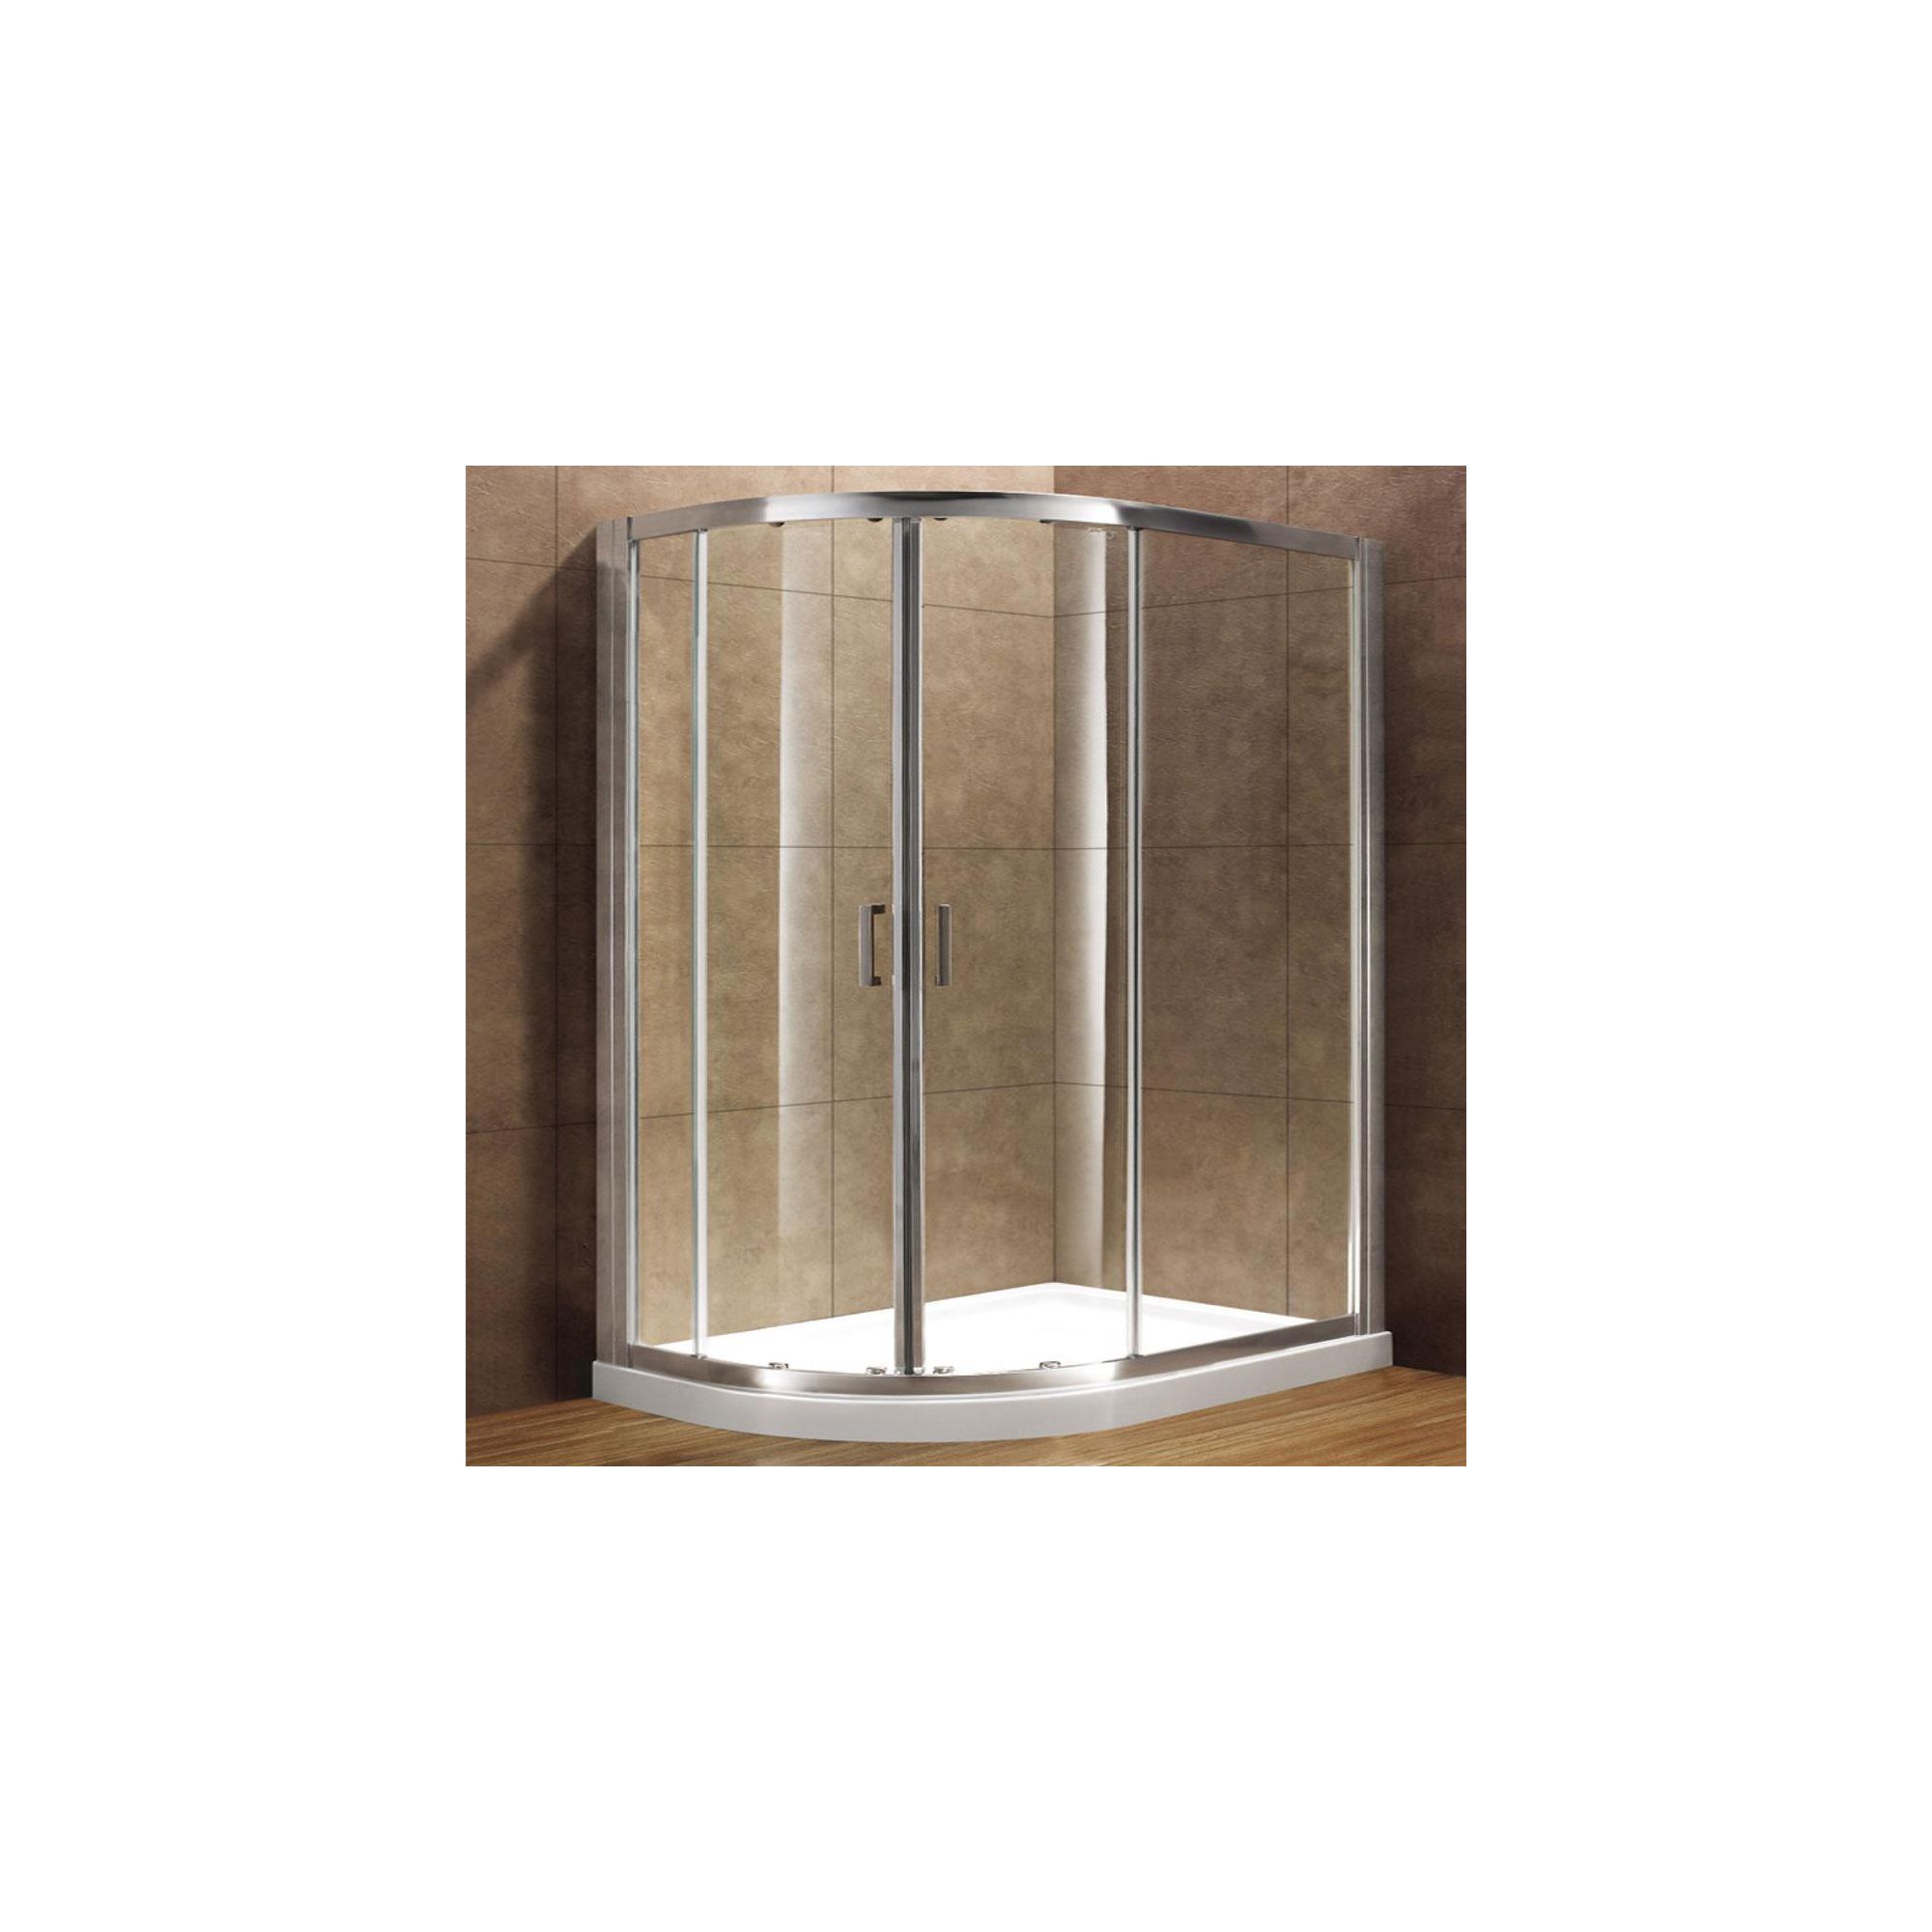 Duchy Premium Double Offset Quadrant Door Shower Enclosure, 1000mm x 800mm, 8mm Glass, Low Profile Tray, Left Handed at Tesco Direct